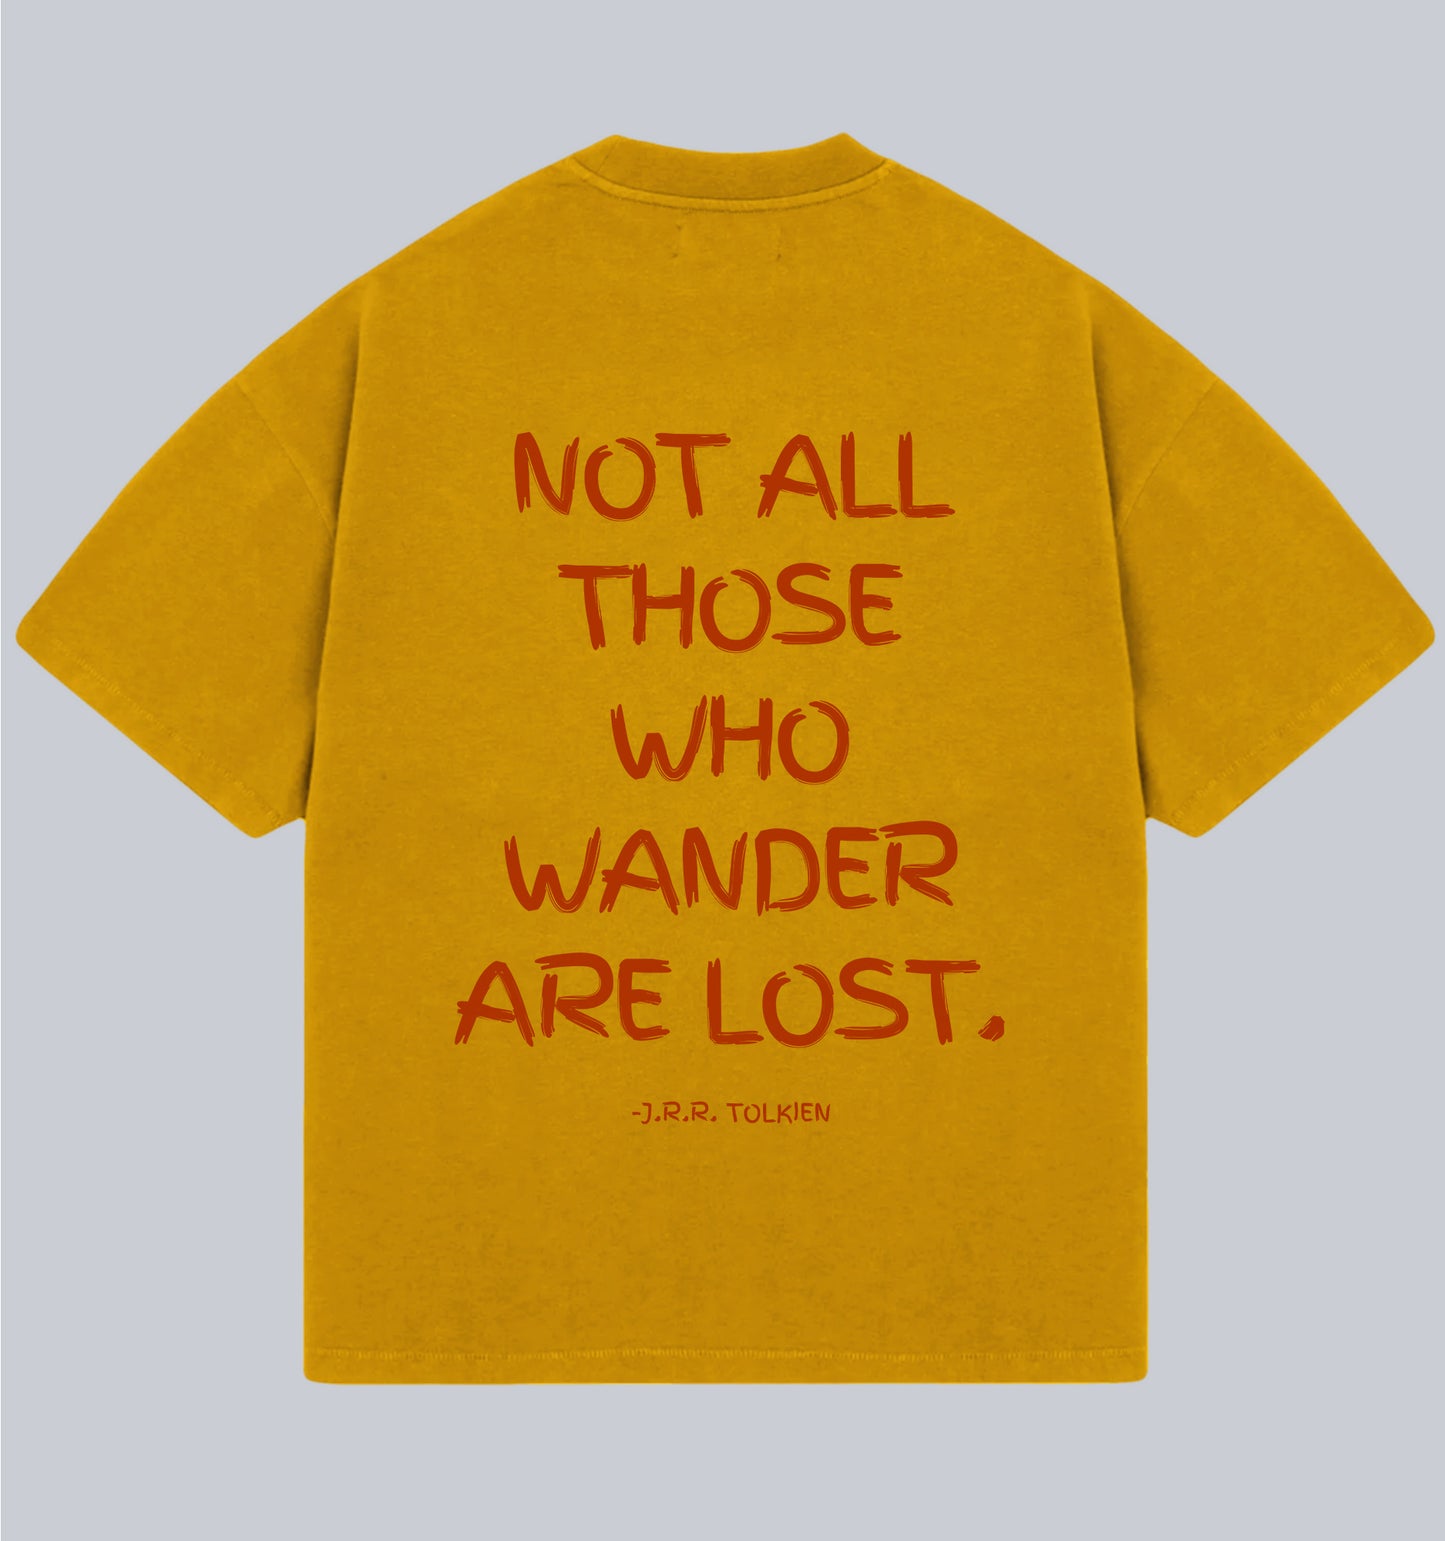 Not All Those Who Wander Are Lost Oversized Unisex T-shirt (J.R.R. Tolkien) Dead Poet Society